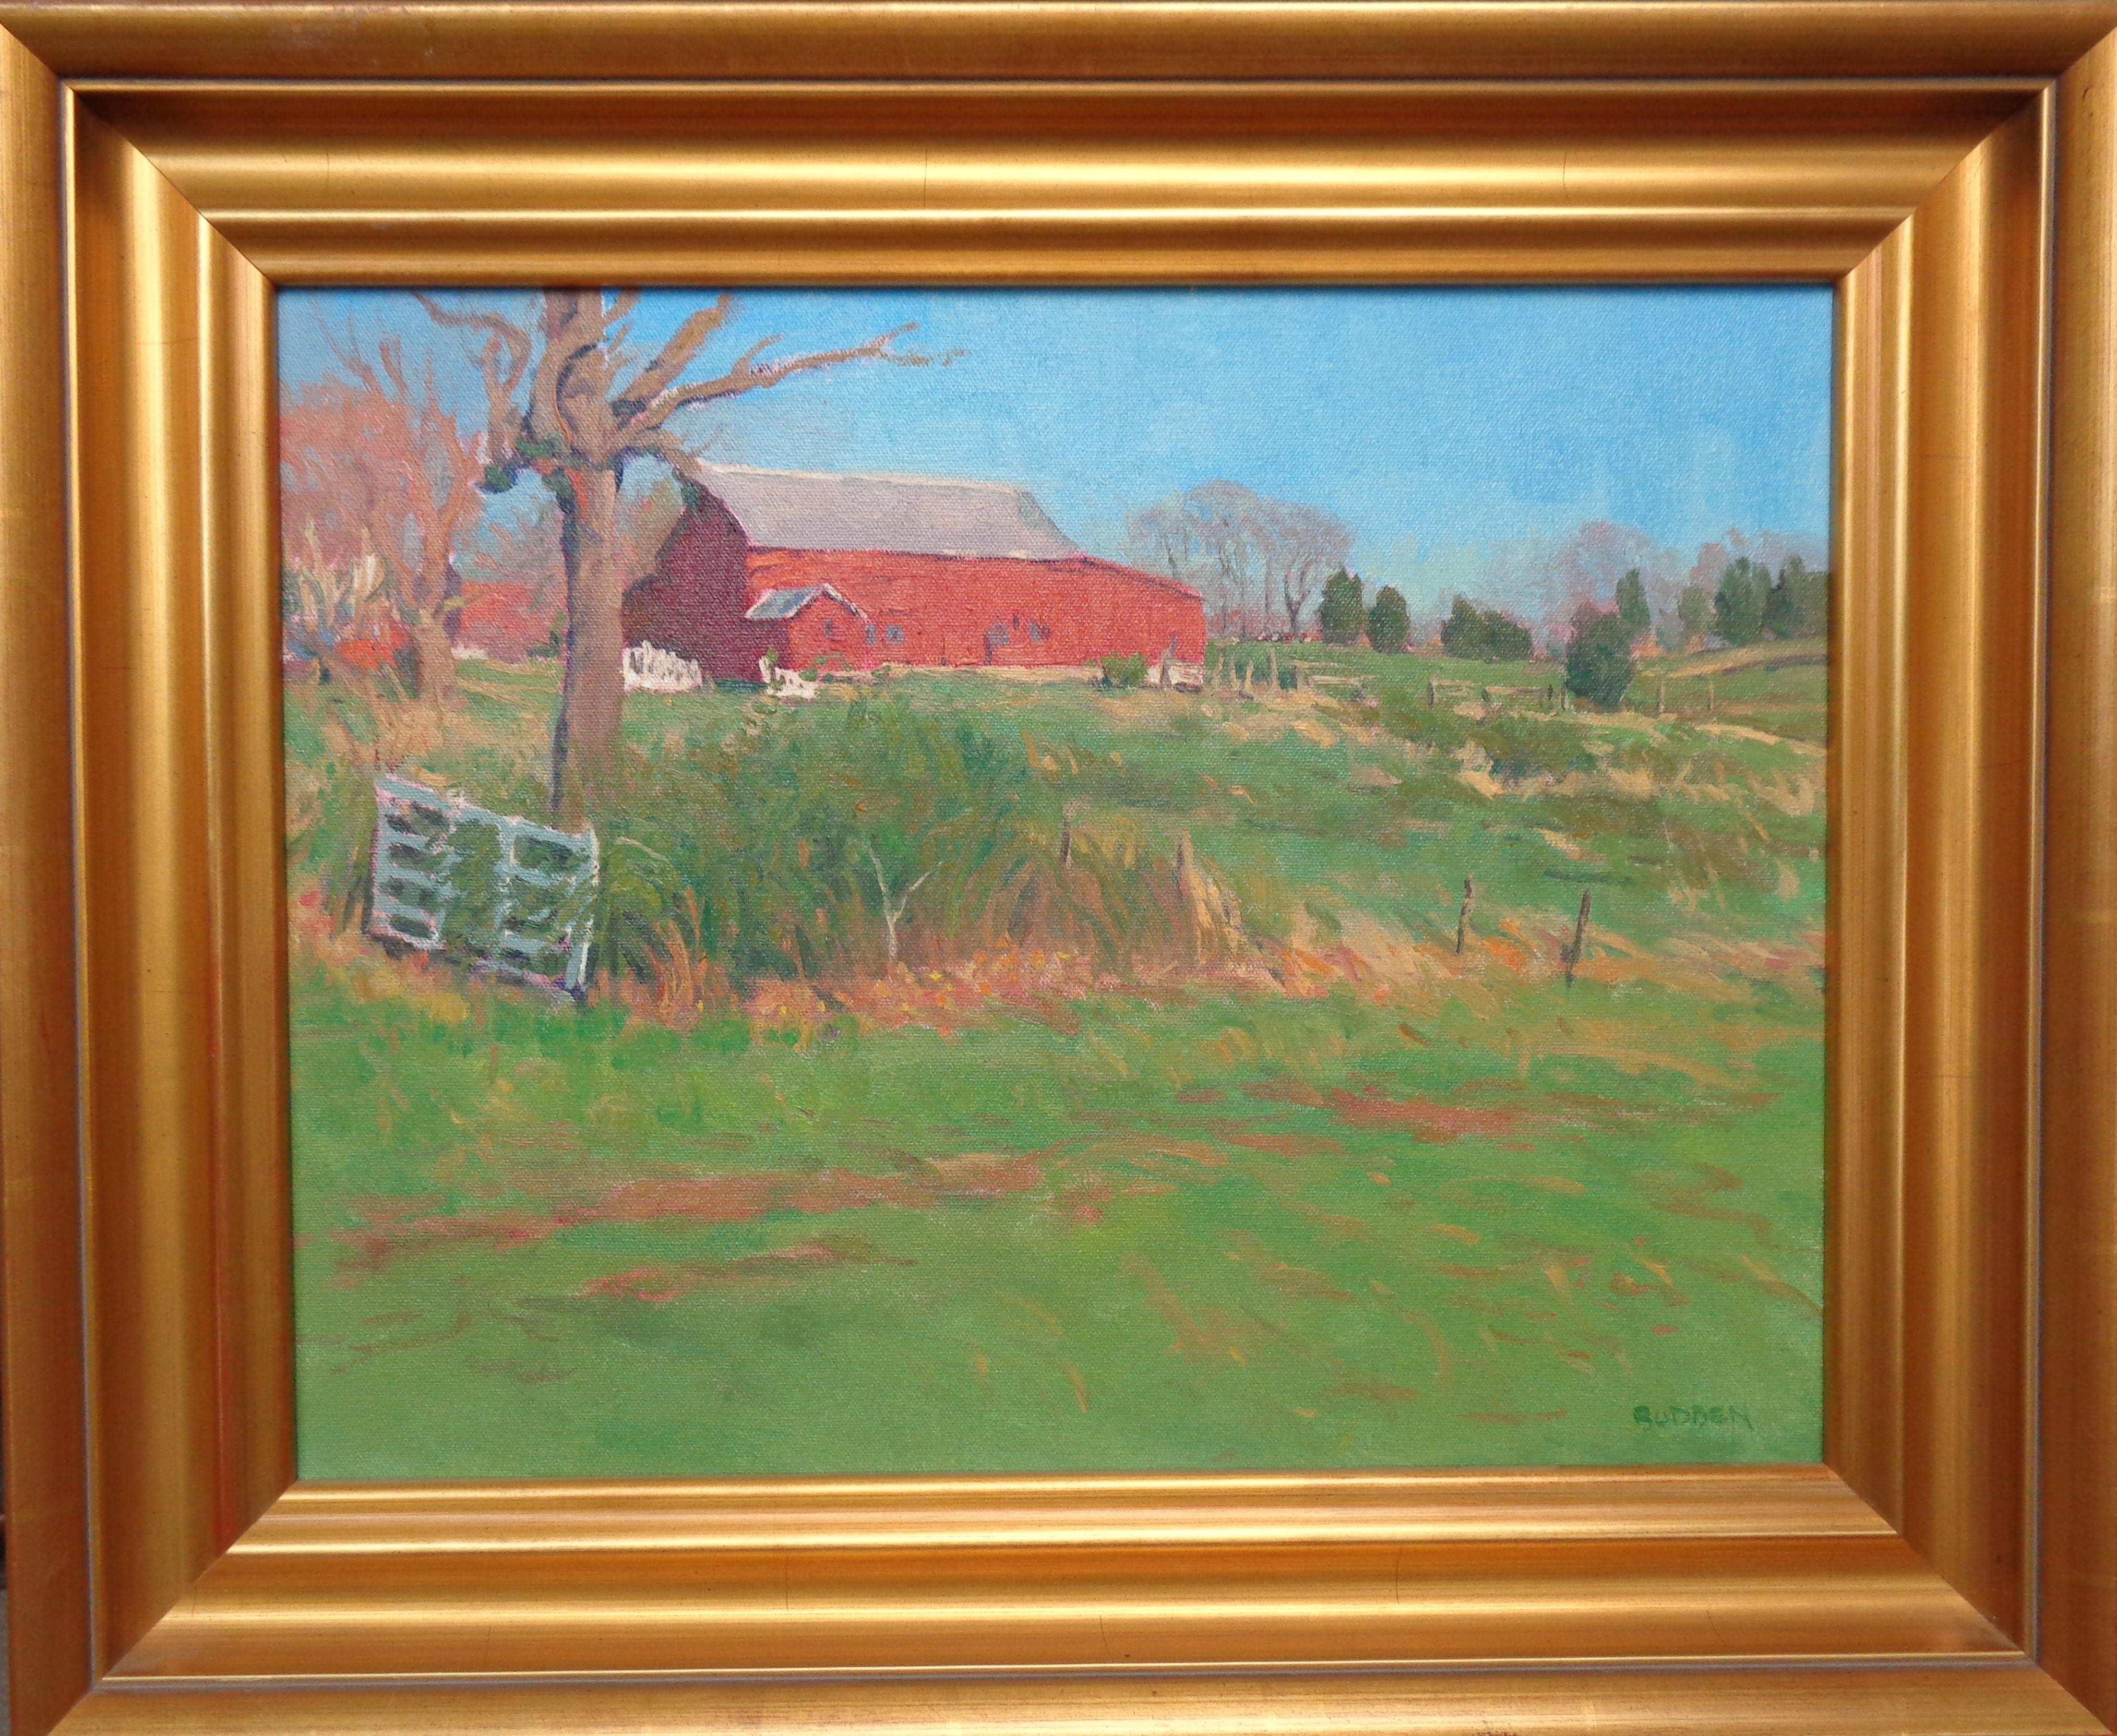 The Lush Light of Spring 
oil/canvas
image 14 x 18, is an impressionistic landscape oil painting of a barn near my studio that I did on location in one sitting. The painting is on canvas and exudes the rich qualities of oil paint with bright strong